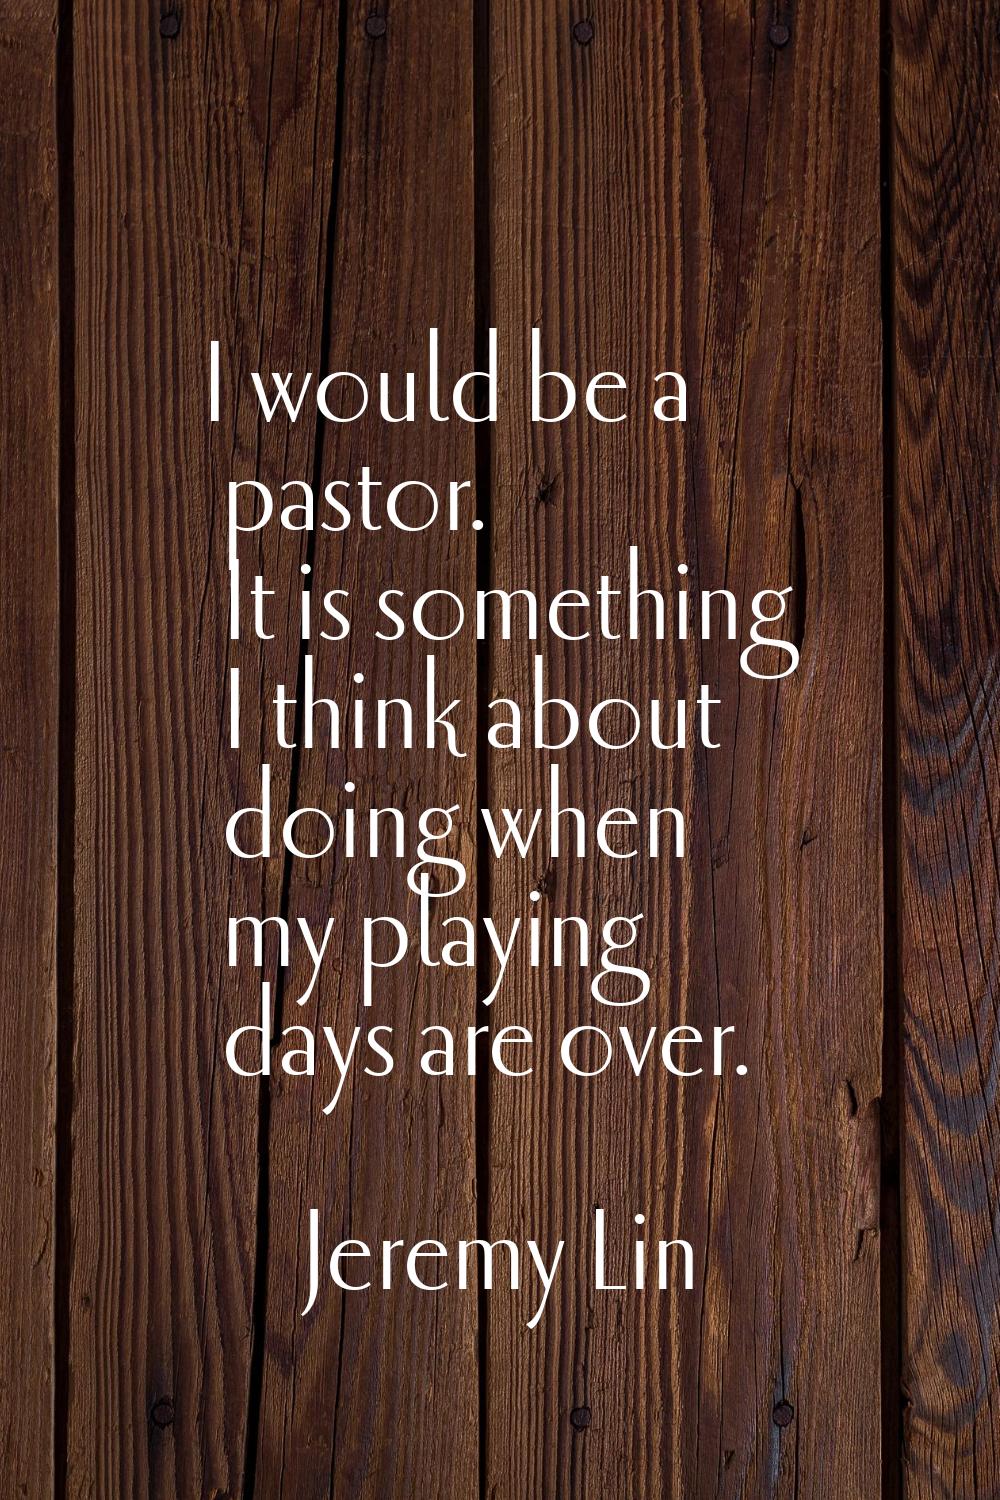 I would be a pastor. It is something I think about doing when my playing days are over.